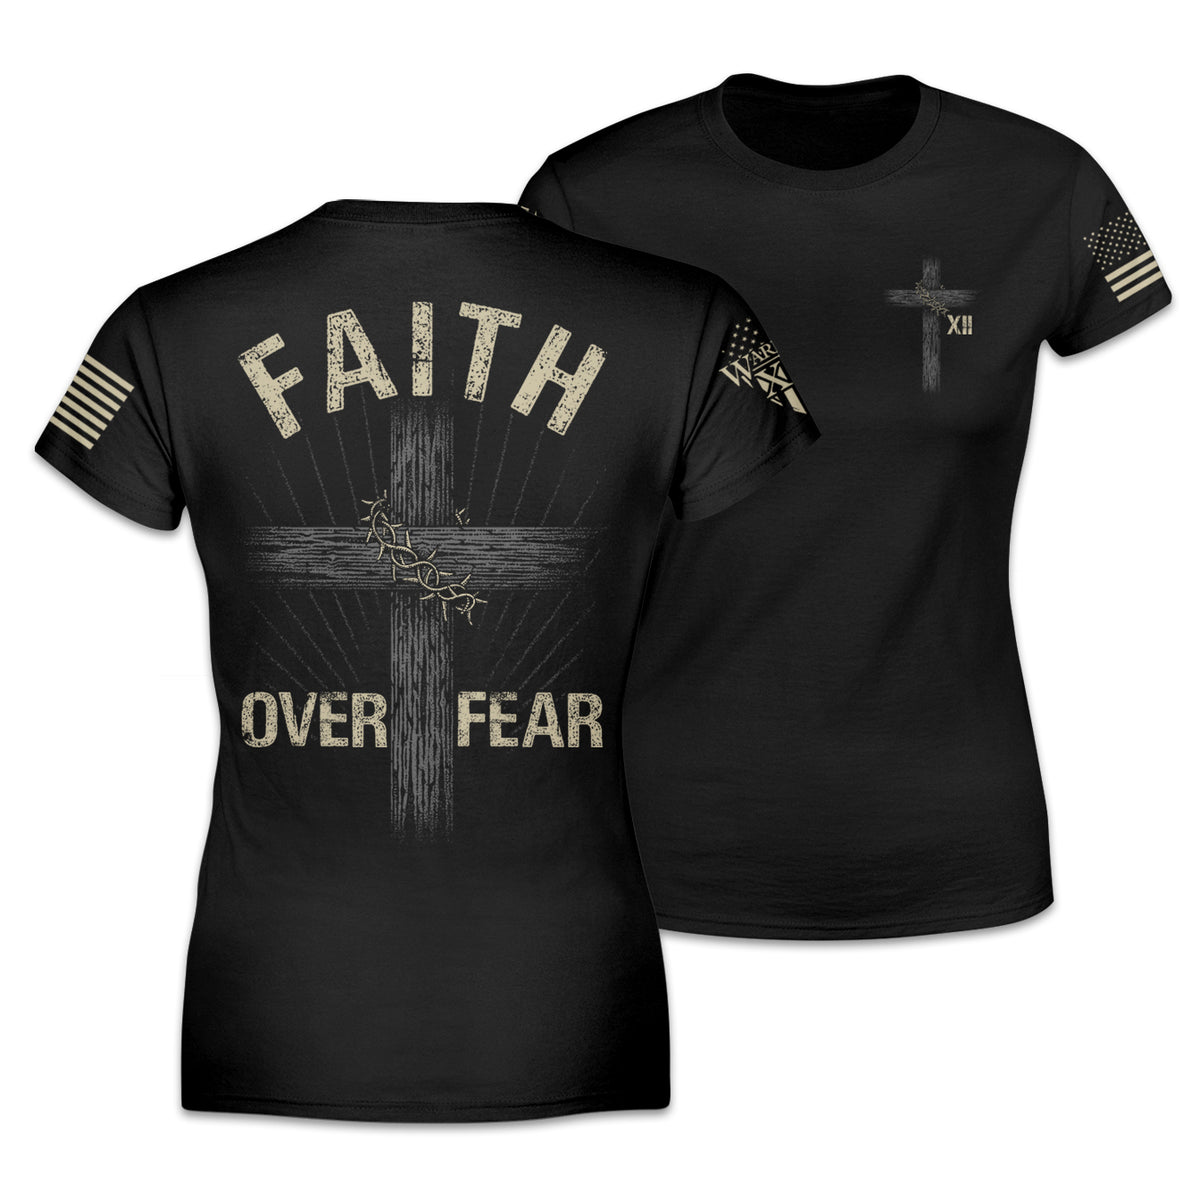 Front & back black women's relaxed fit shirt with the words "Faith Over Fear" with a cross printed on the shirt.